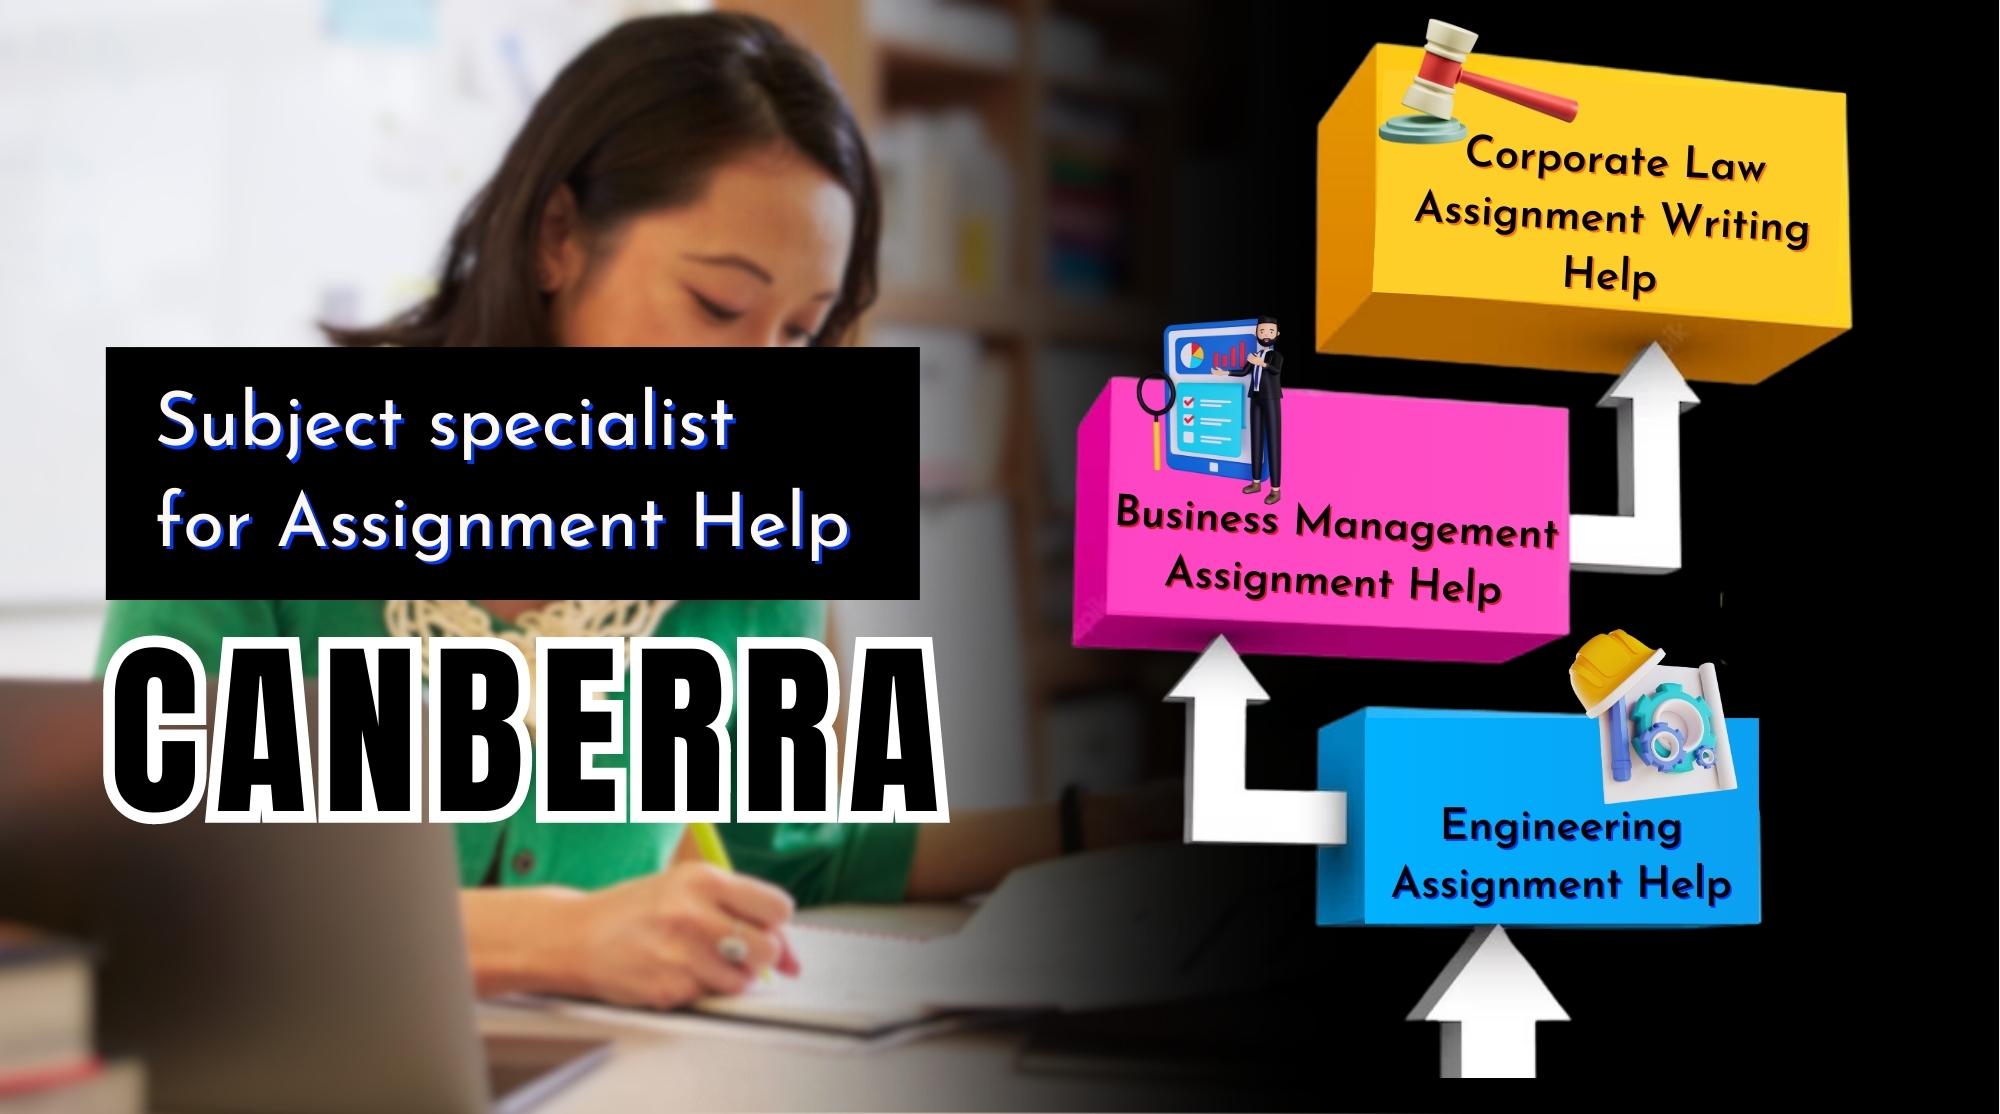 Assignment Help - Subject Specialist in Canberra